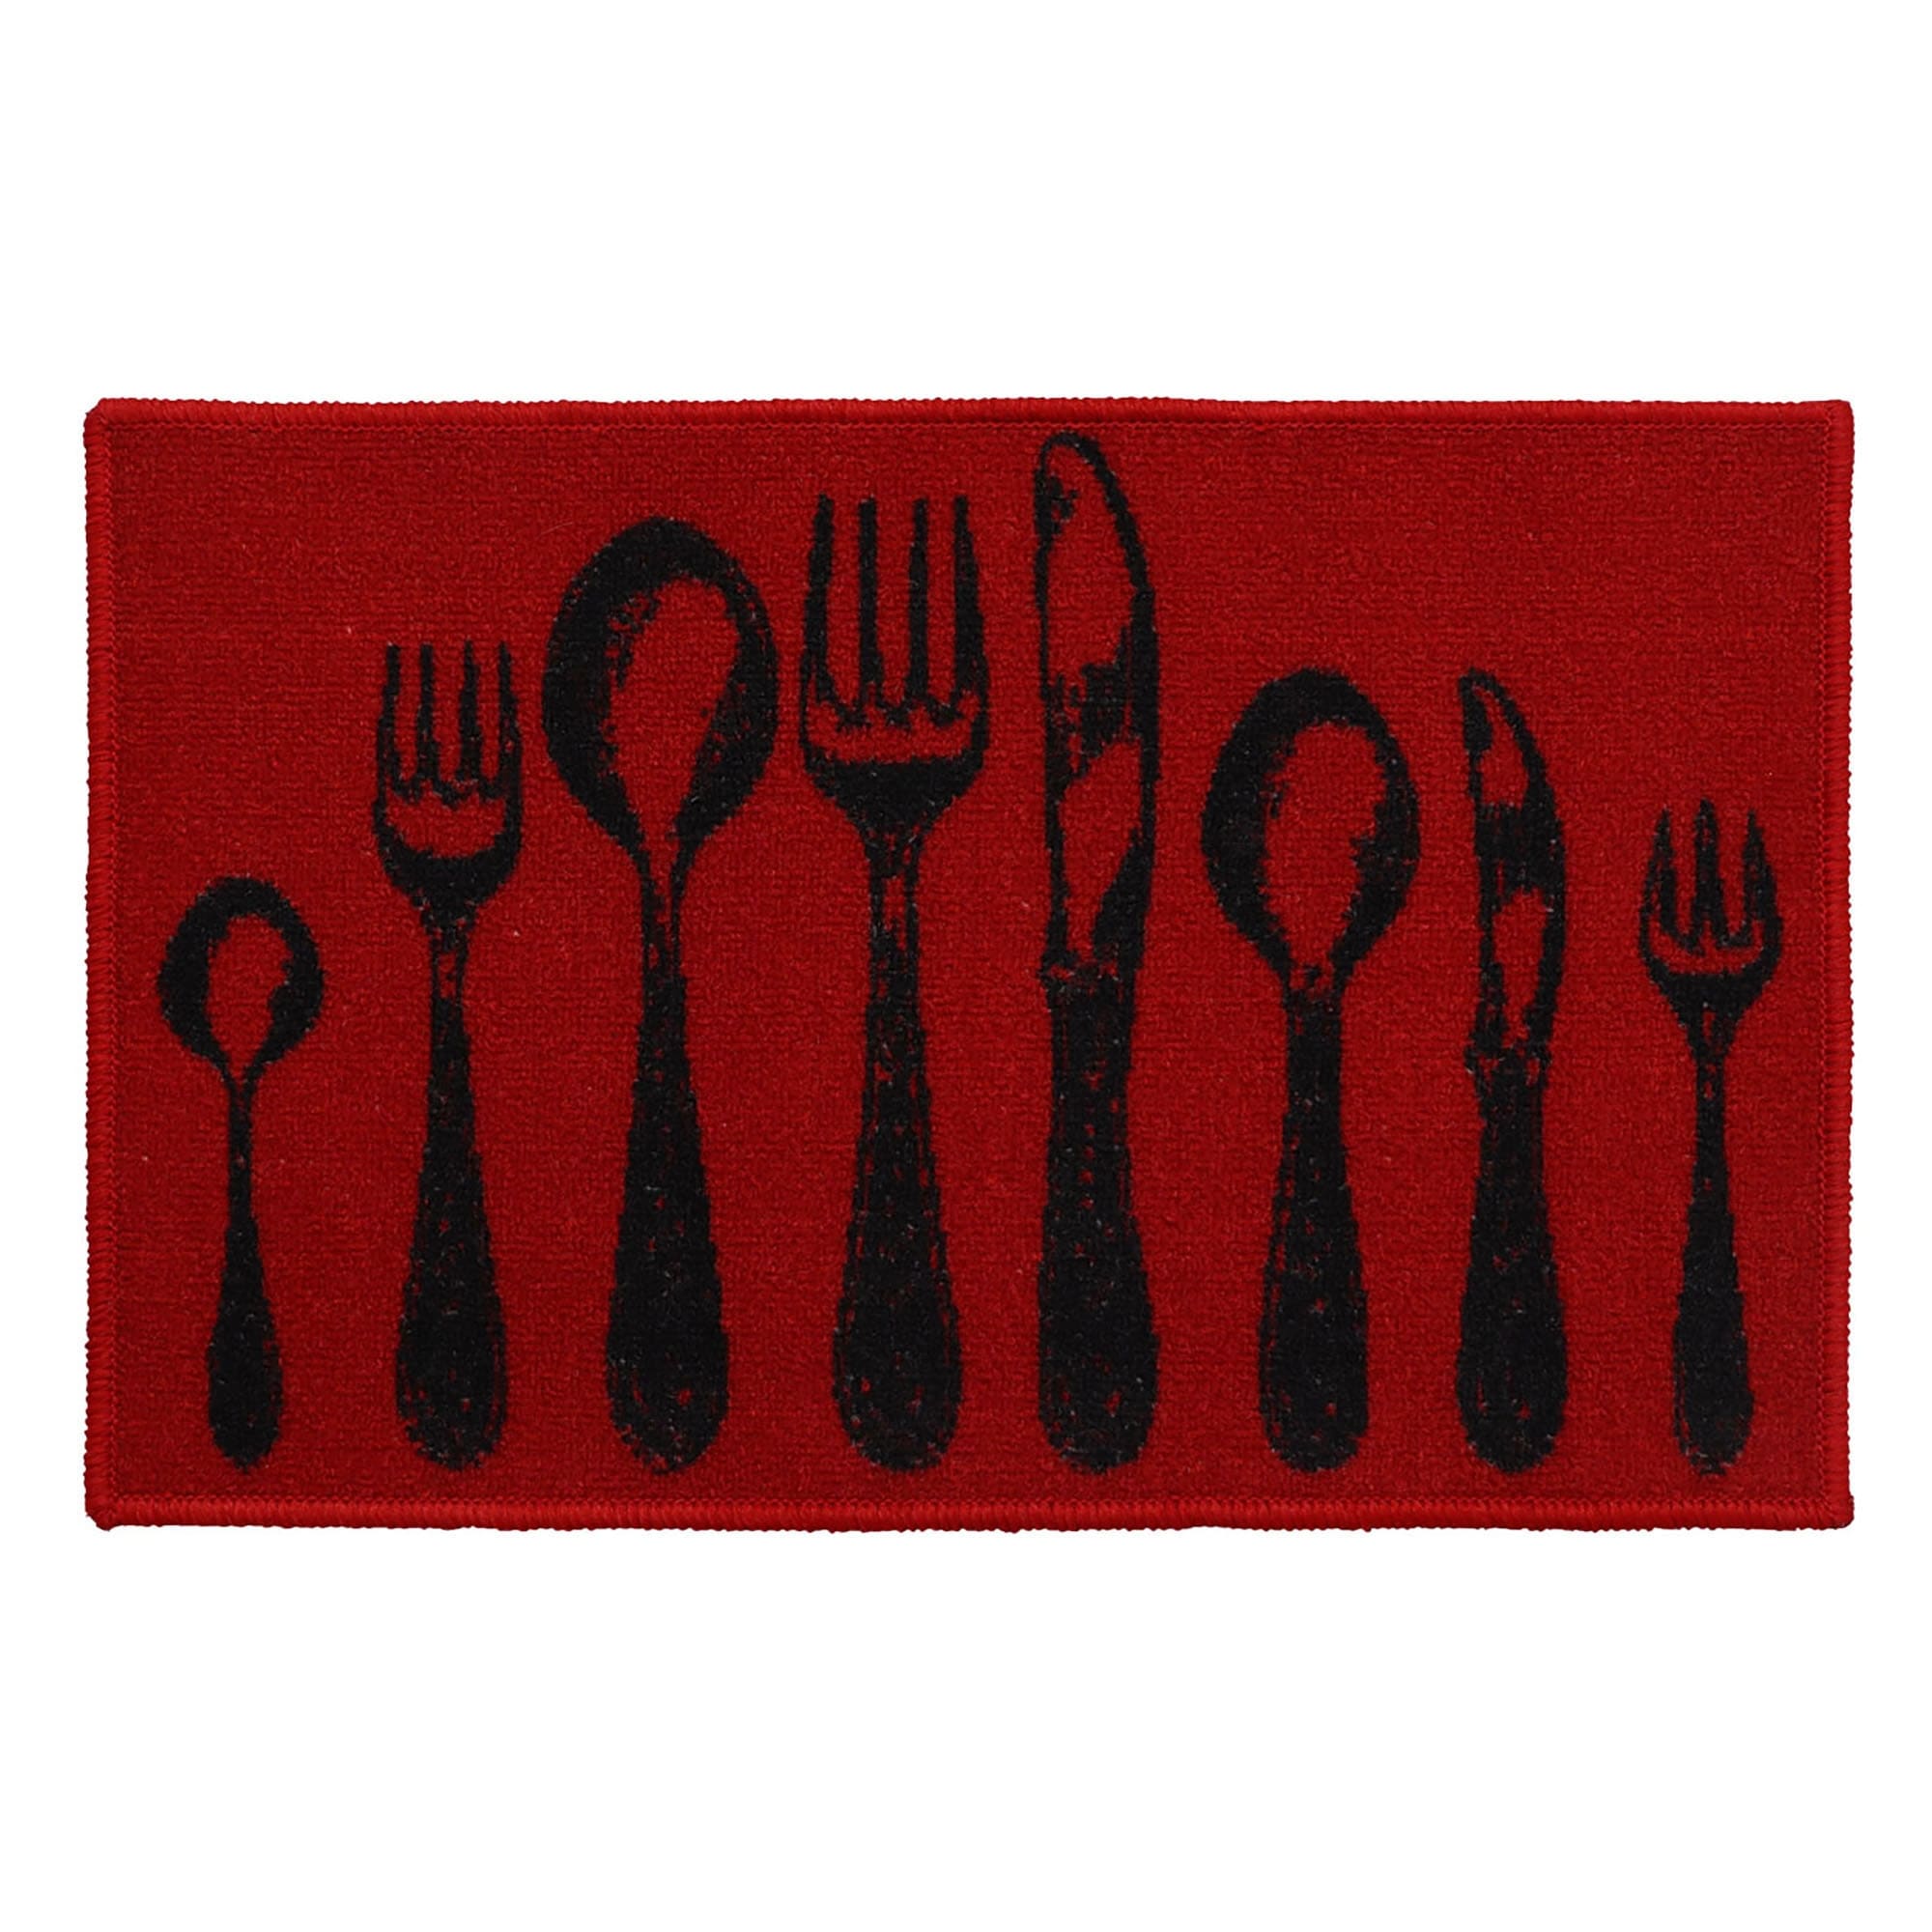 https://ak1.ostkcdn.com/images/products/is/images/direct/733ed043735303c965850b1933304bfe73d75c03/Chic-Cutlery-Print-Wool-Effect-Kitchen-Mat-and-Runner-Rug.jpg